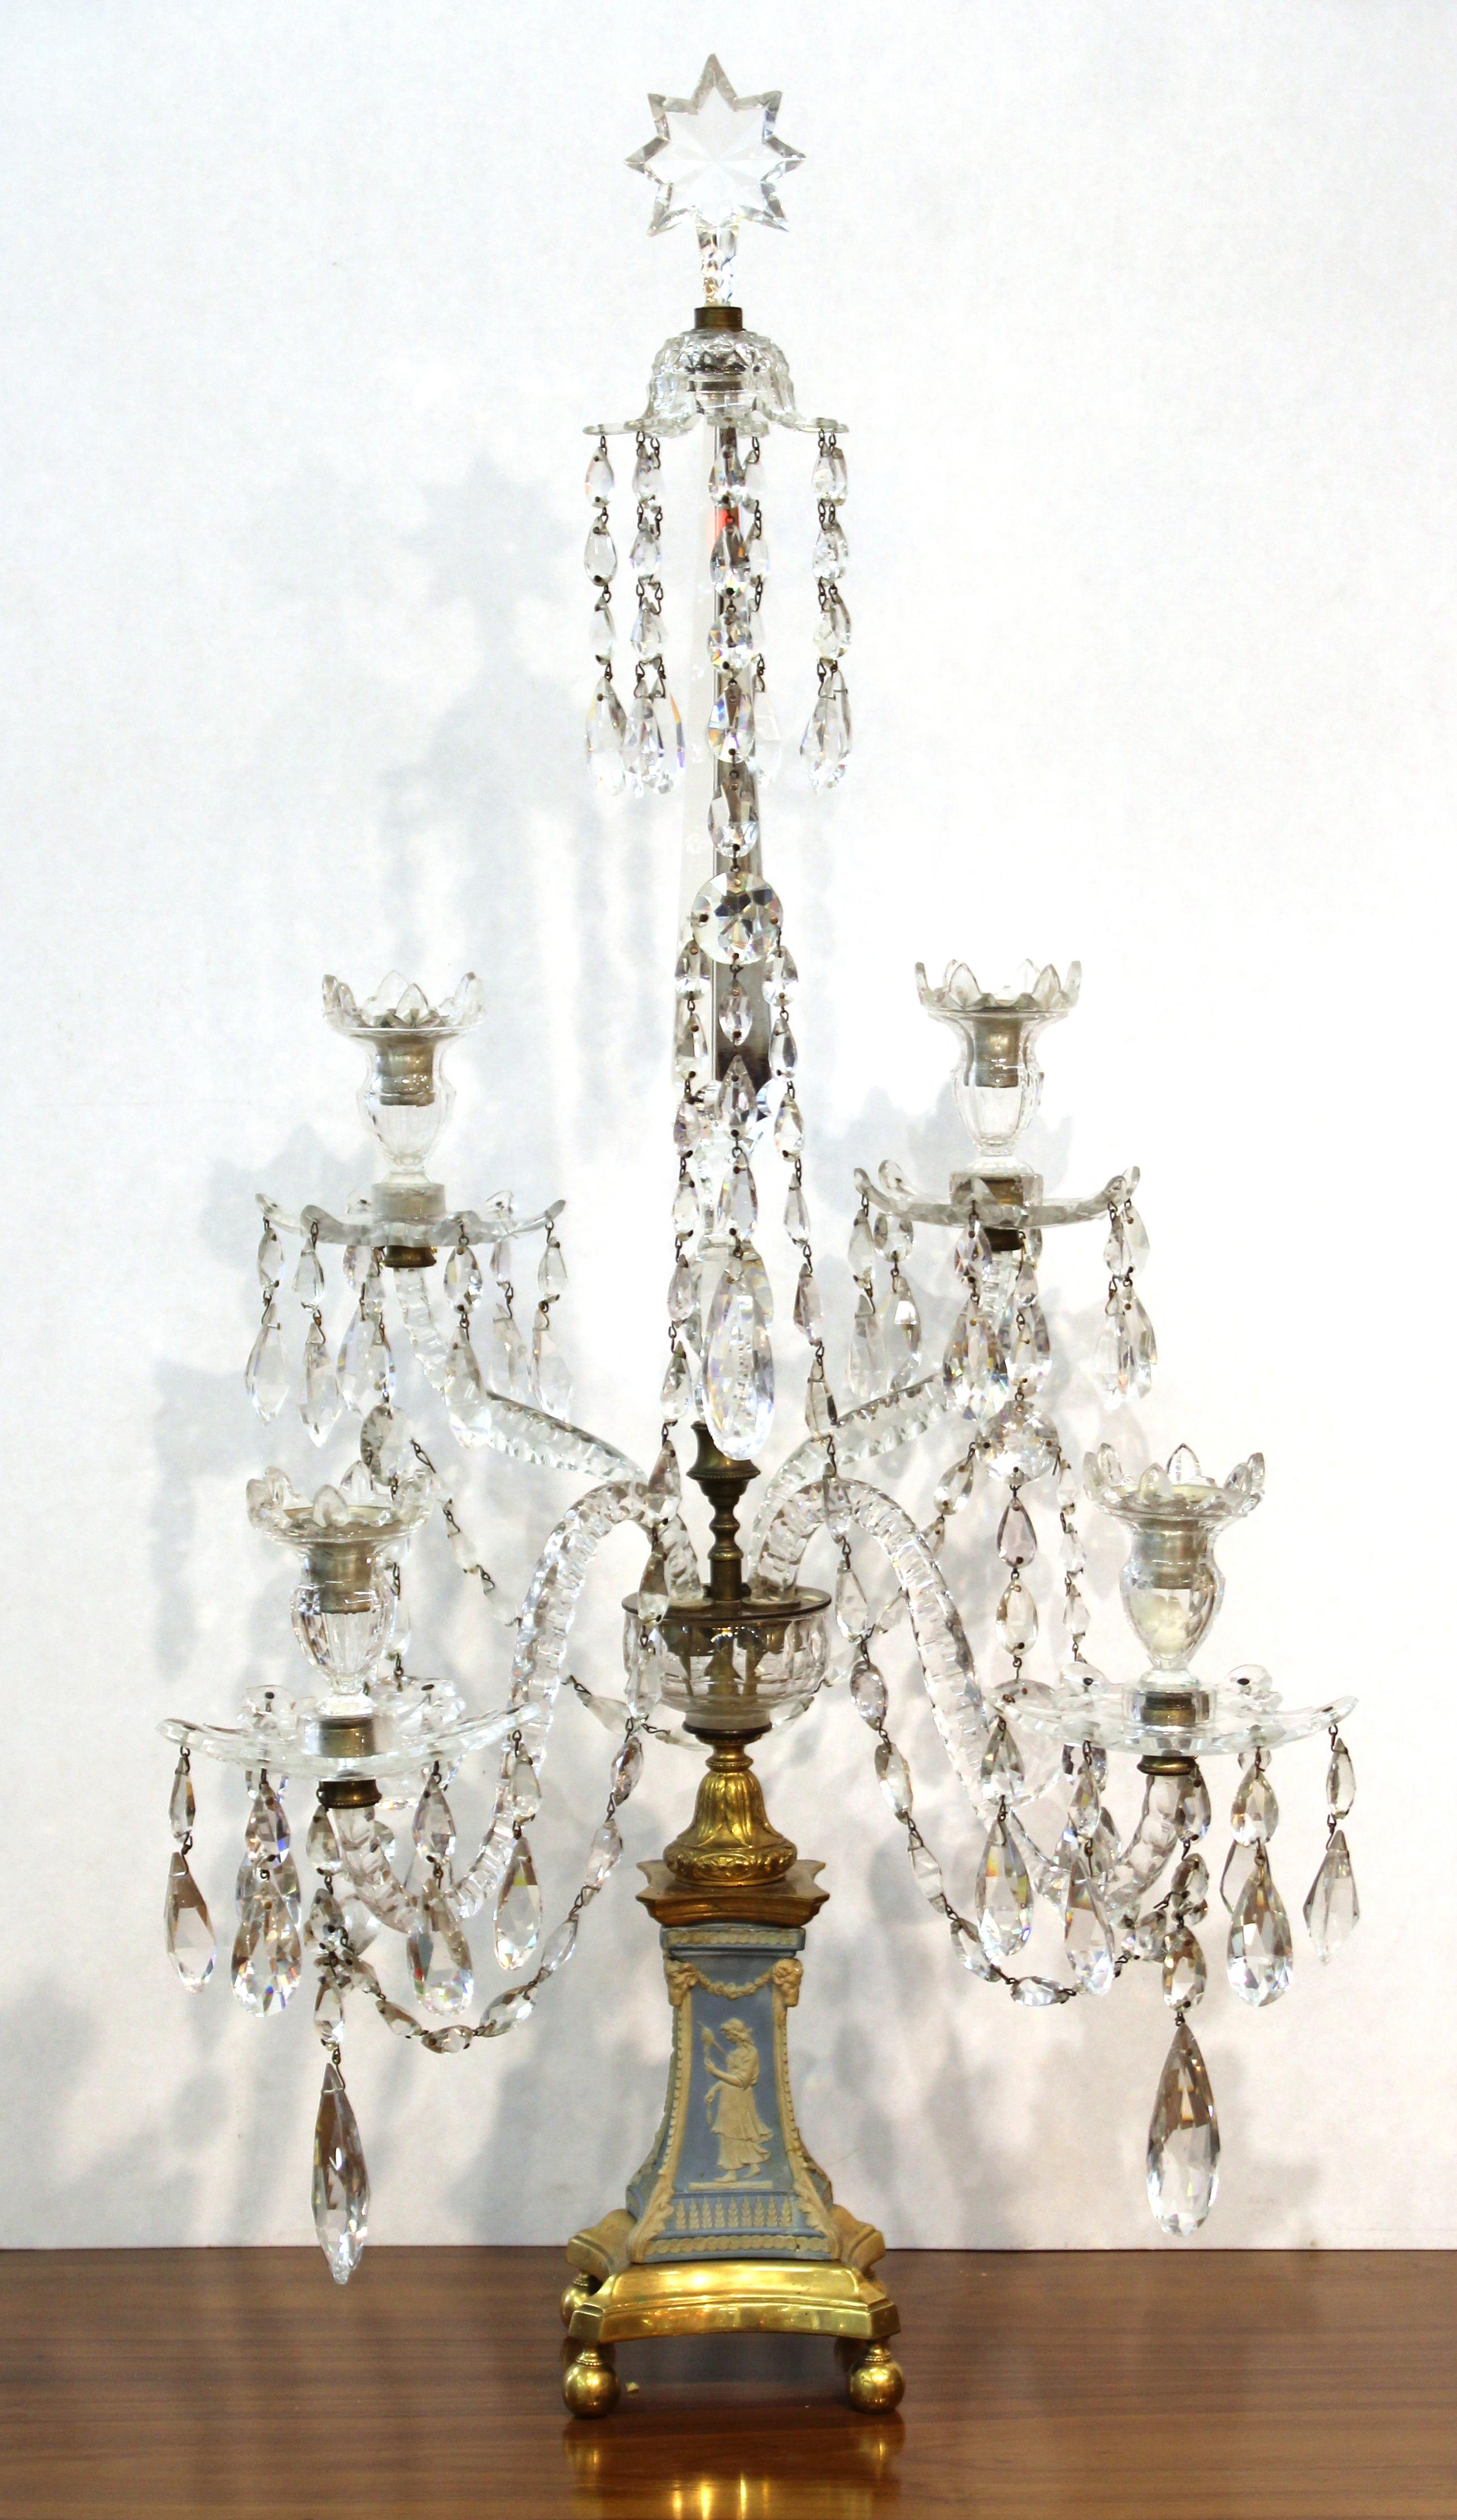 English George III period pair of four light candelabra girandoles attributed to William Parker. The pair has gilt bronze bases with Wedgwood jasperware four-sided plinths in neoclassical revival designs likely provided by Lady Templeon to Wedgwood